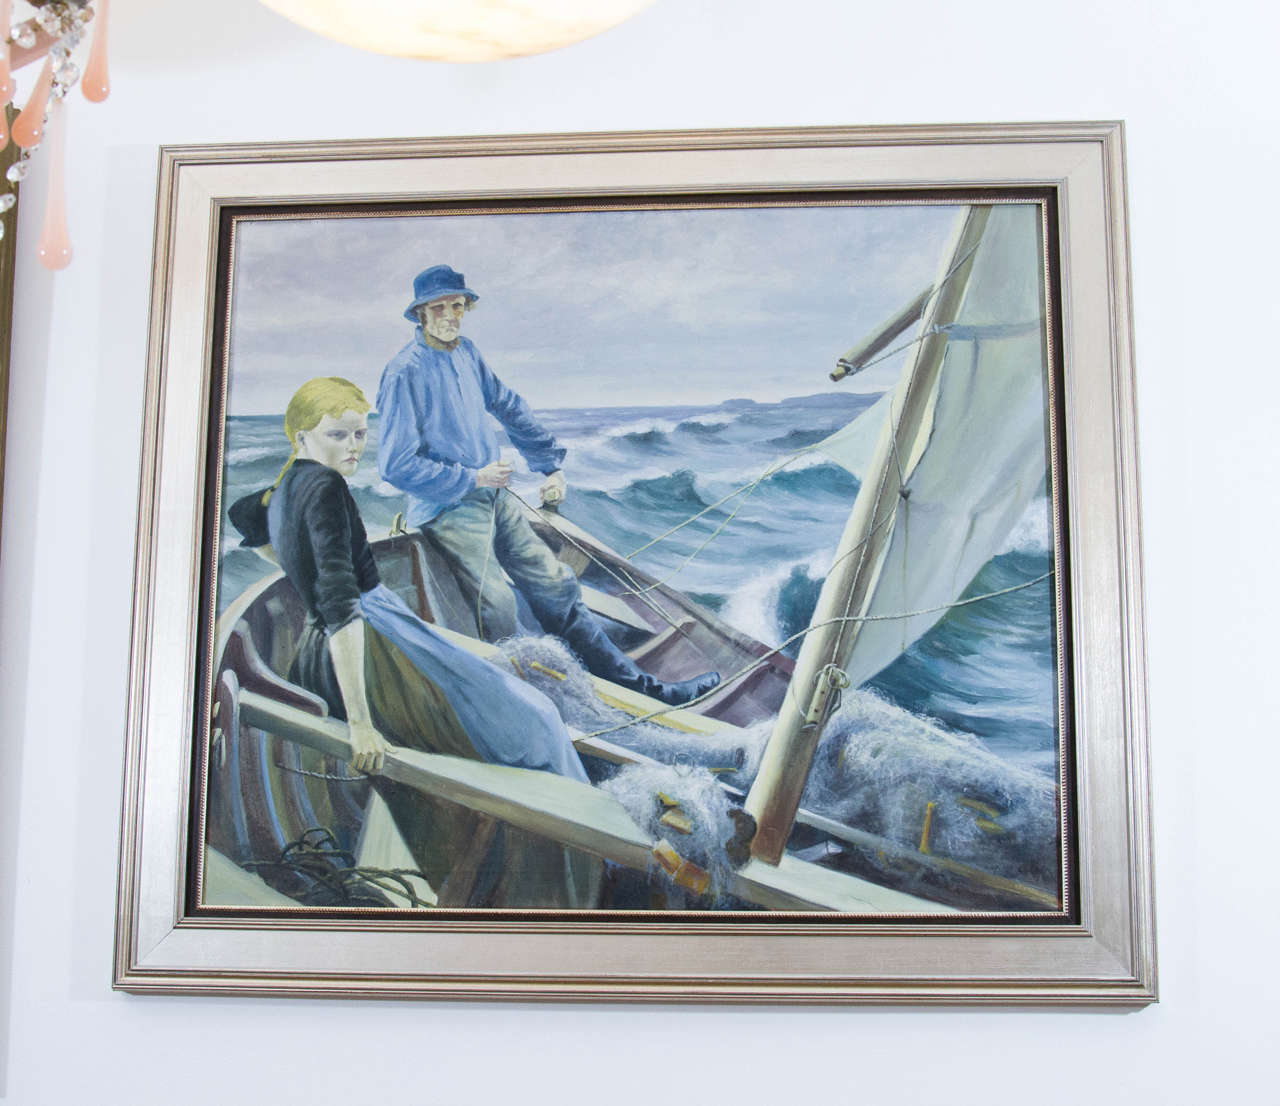 Another piece of every man's Nordic heritage: a fisherman and his wife, earning their living on the sea. Masts capture the gusts, propelling the pair forward on their journey, nets at the ready. Life as they lived it. The painting is signed, but not